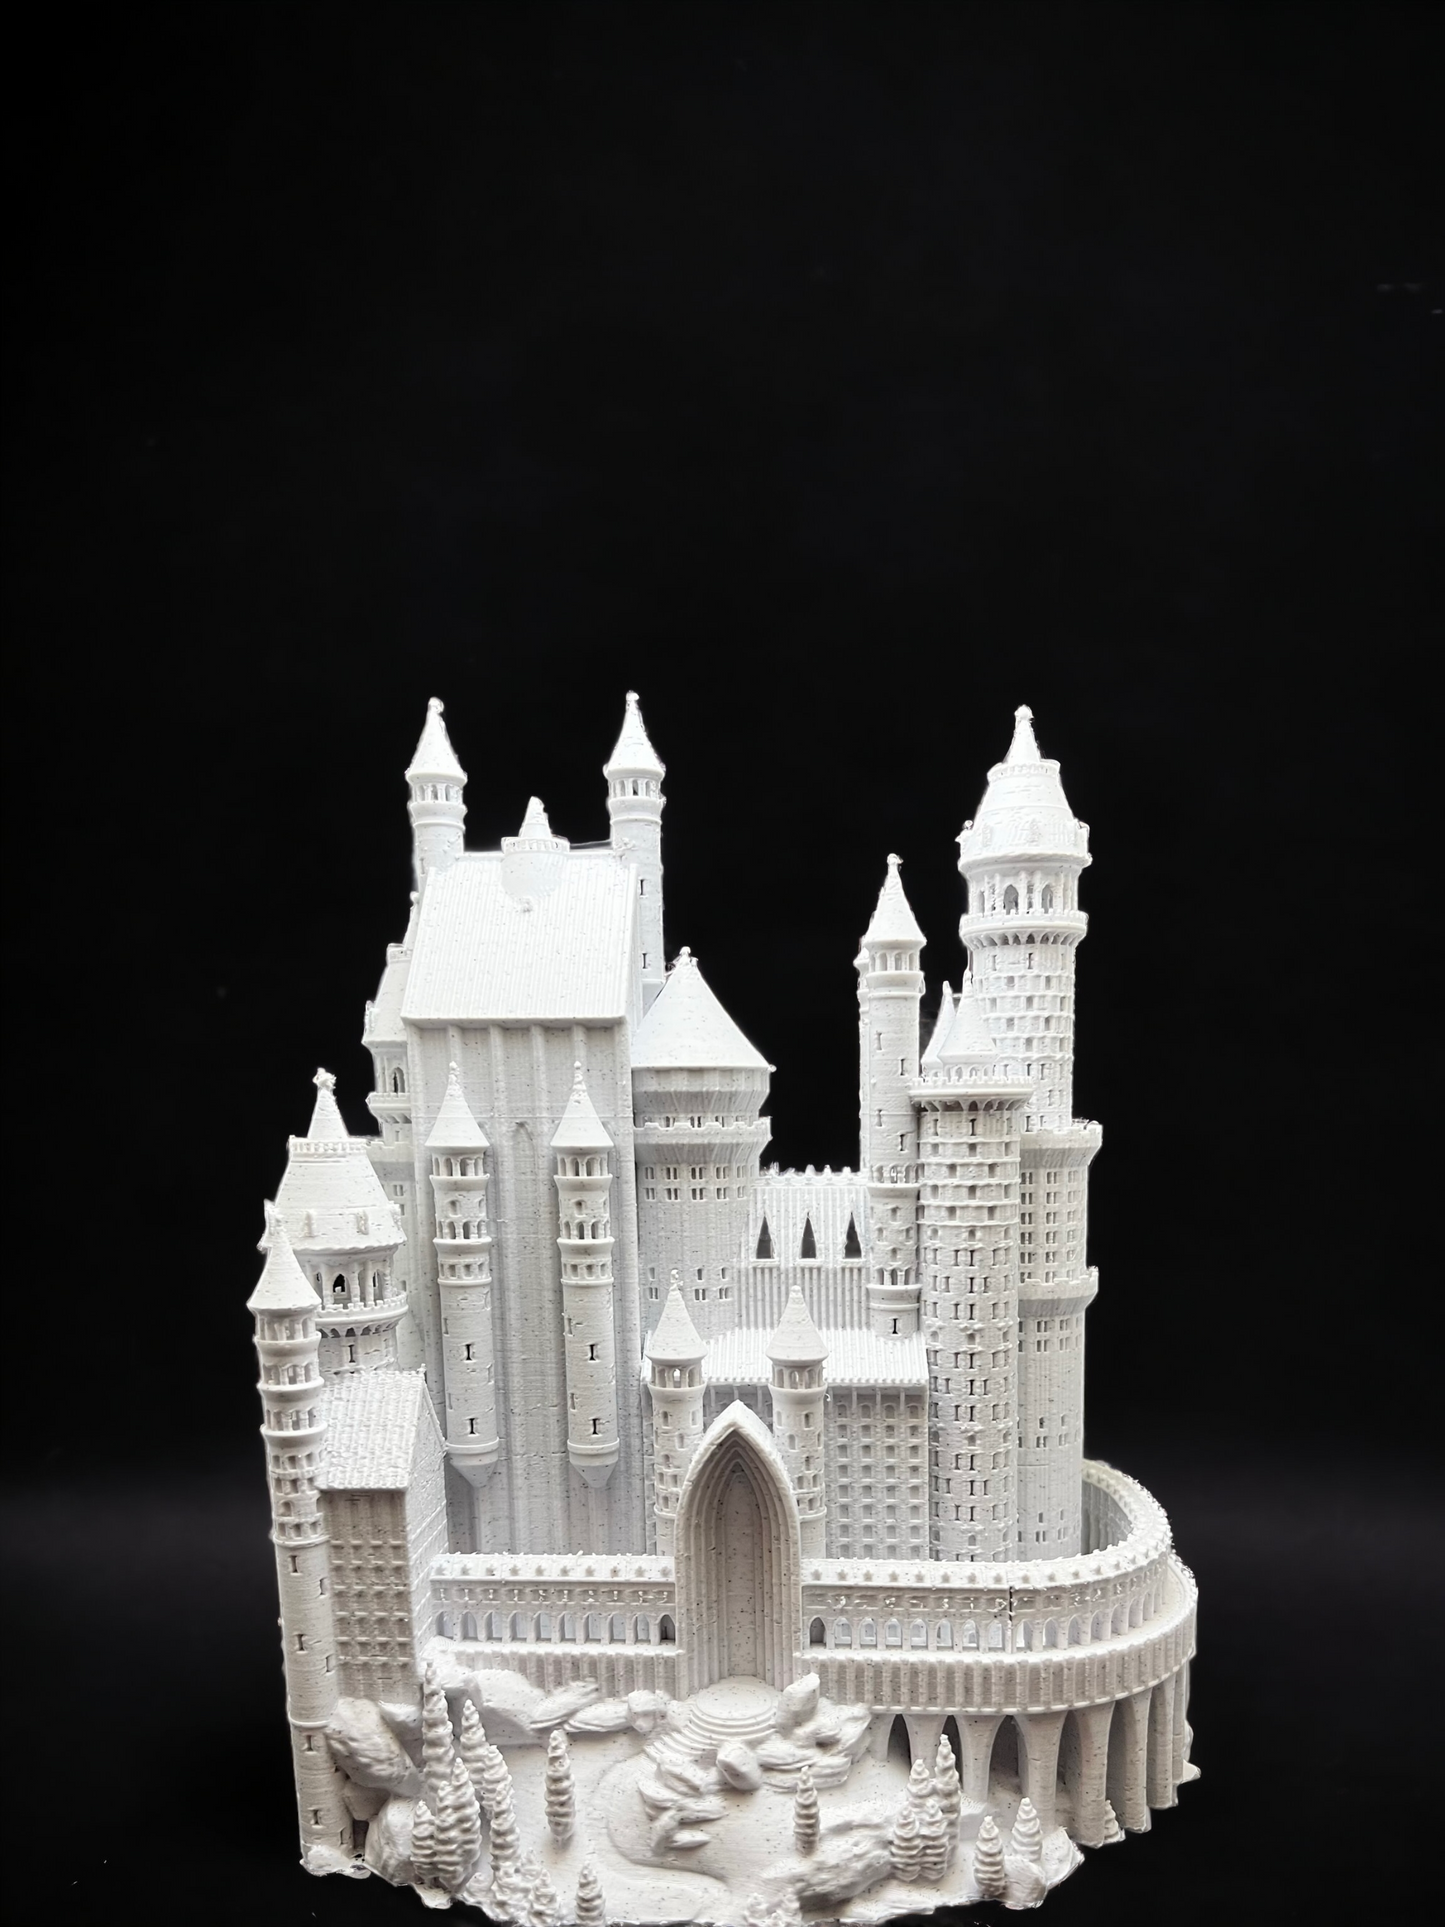 3d print Castle, 3d print architecture, school project, Fairytale gift for her,  Royal figurine, King and Queen decor, history teacher gift